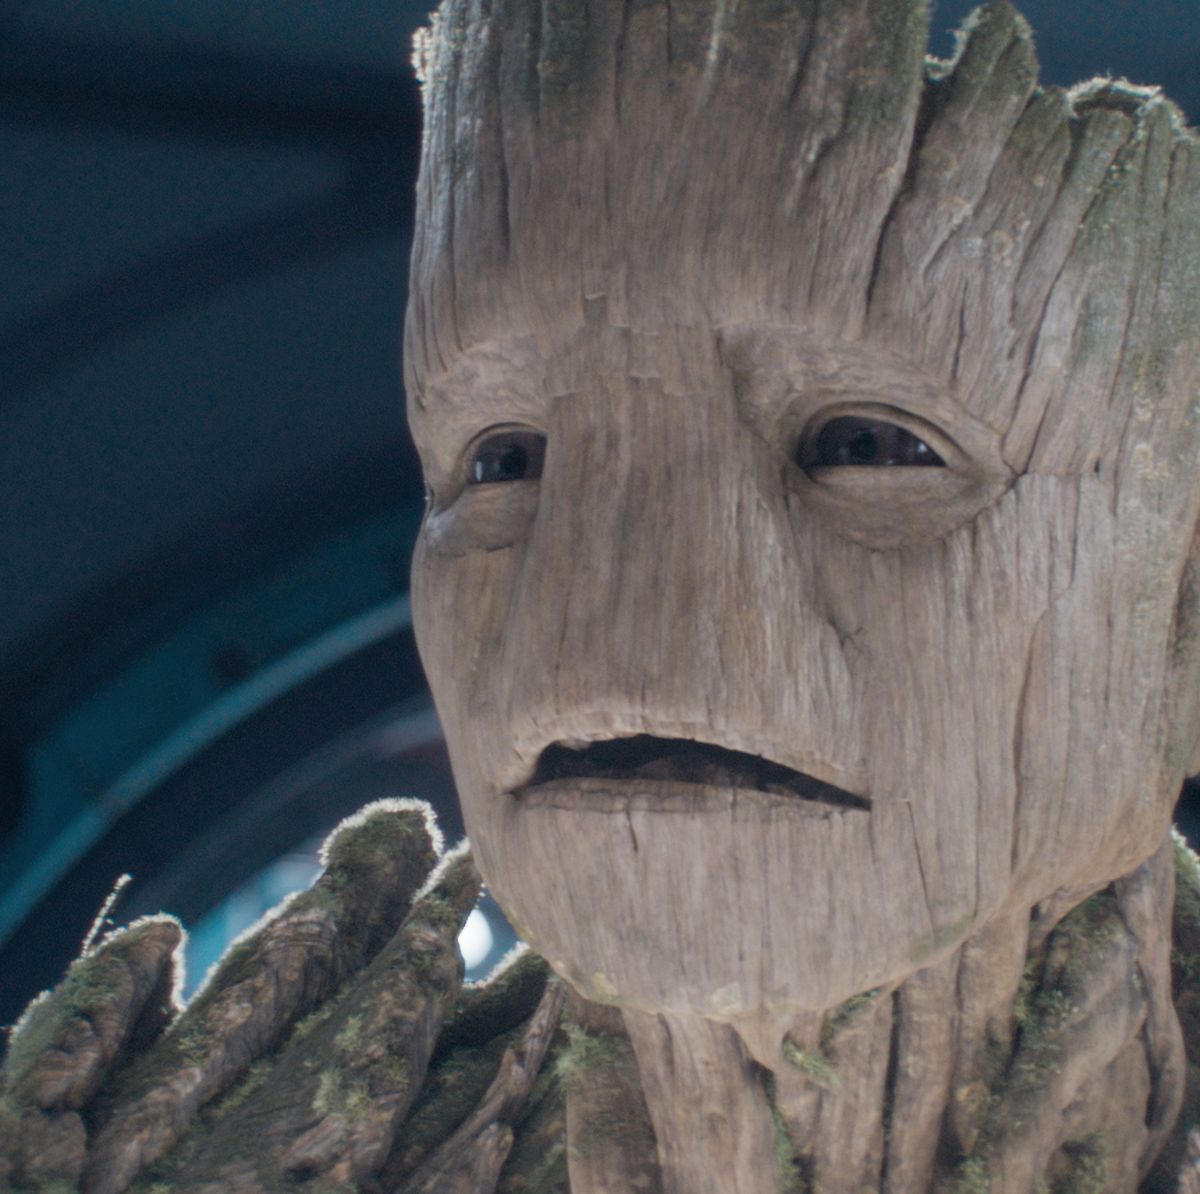 James Gunn confirms Guardians of the Galaxy 3 fan theory about Groot